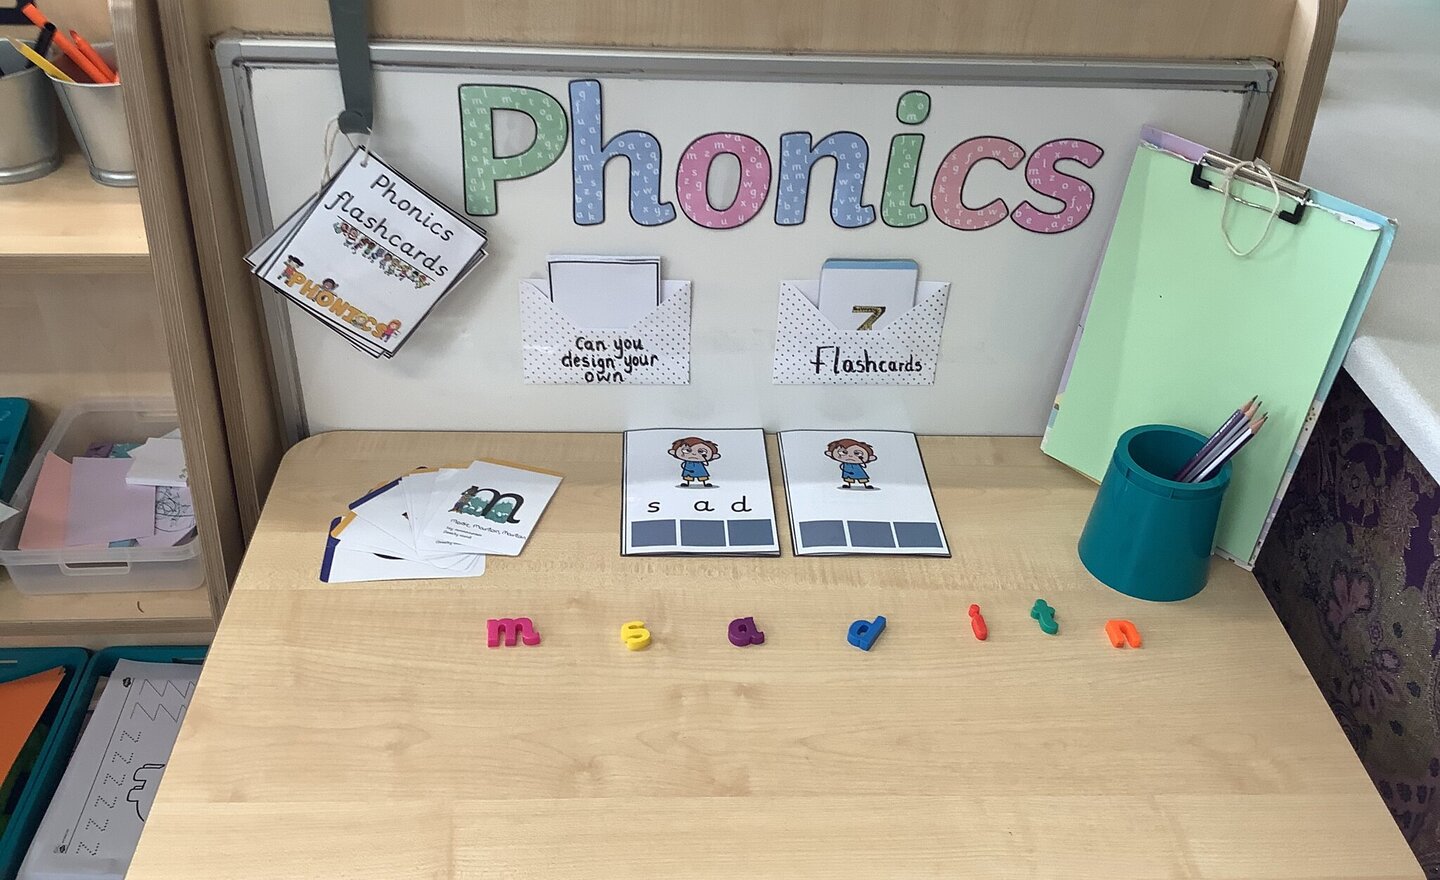 Image of Our new phonics area!